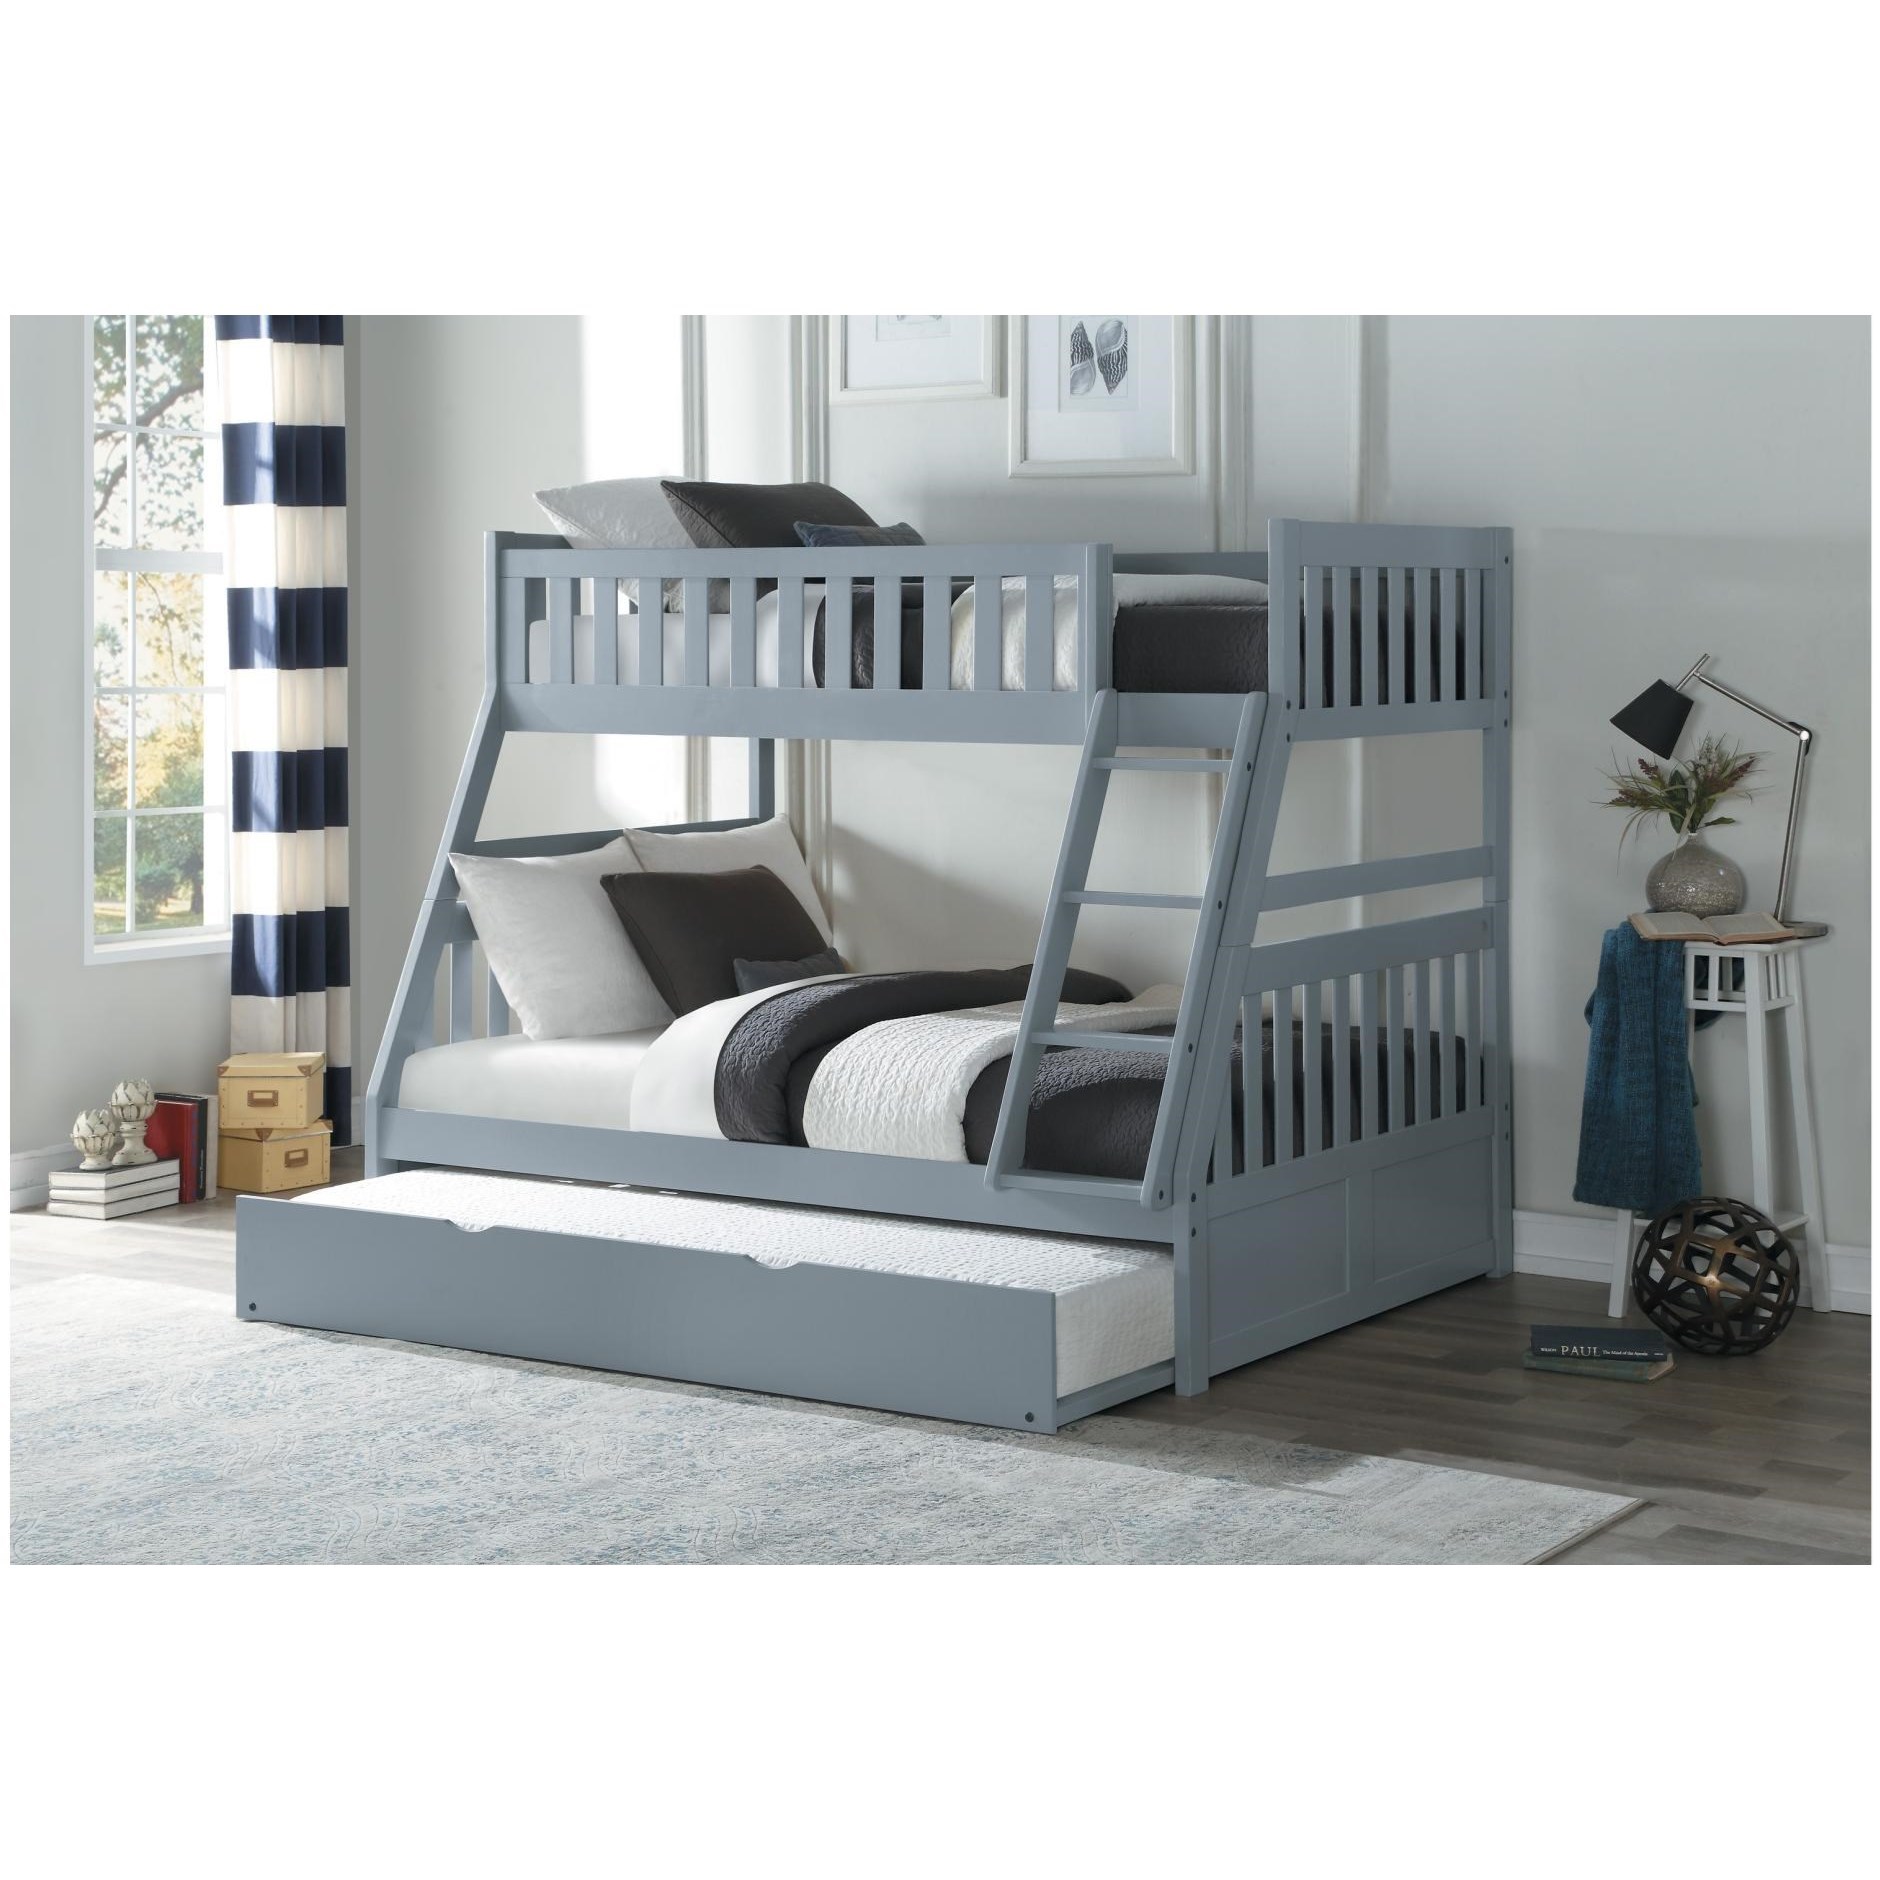 double single bunk bed with trundle